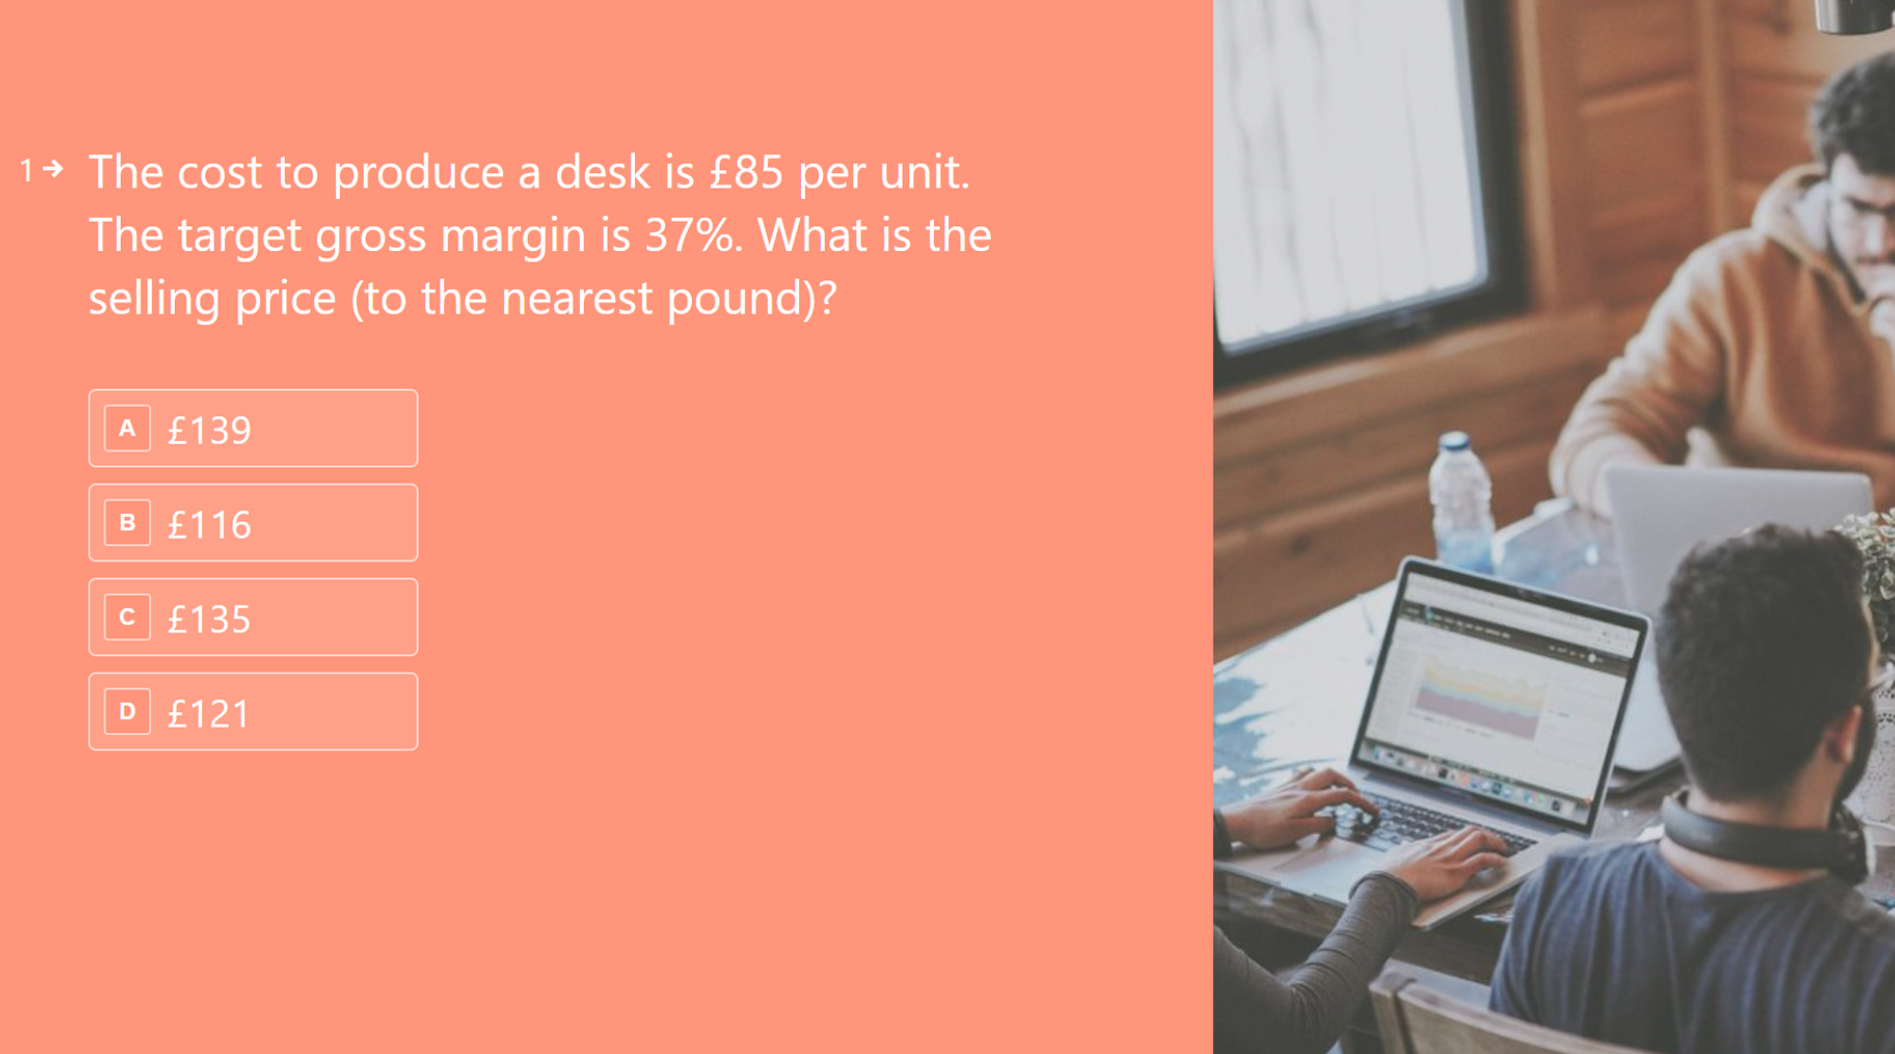 a quiz question asking for the price of a desk that costs £85 if the gross margin is 37%